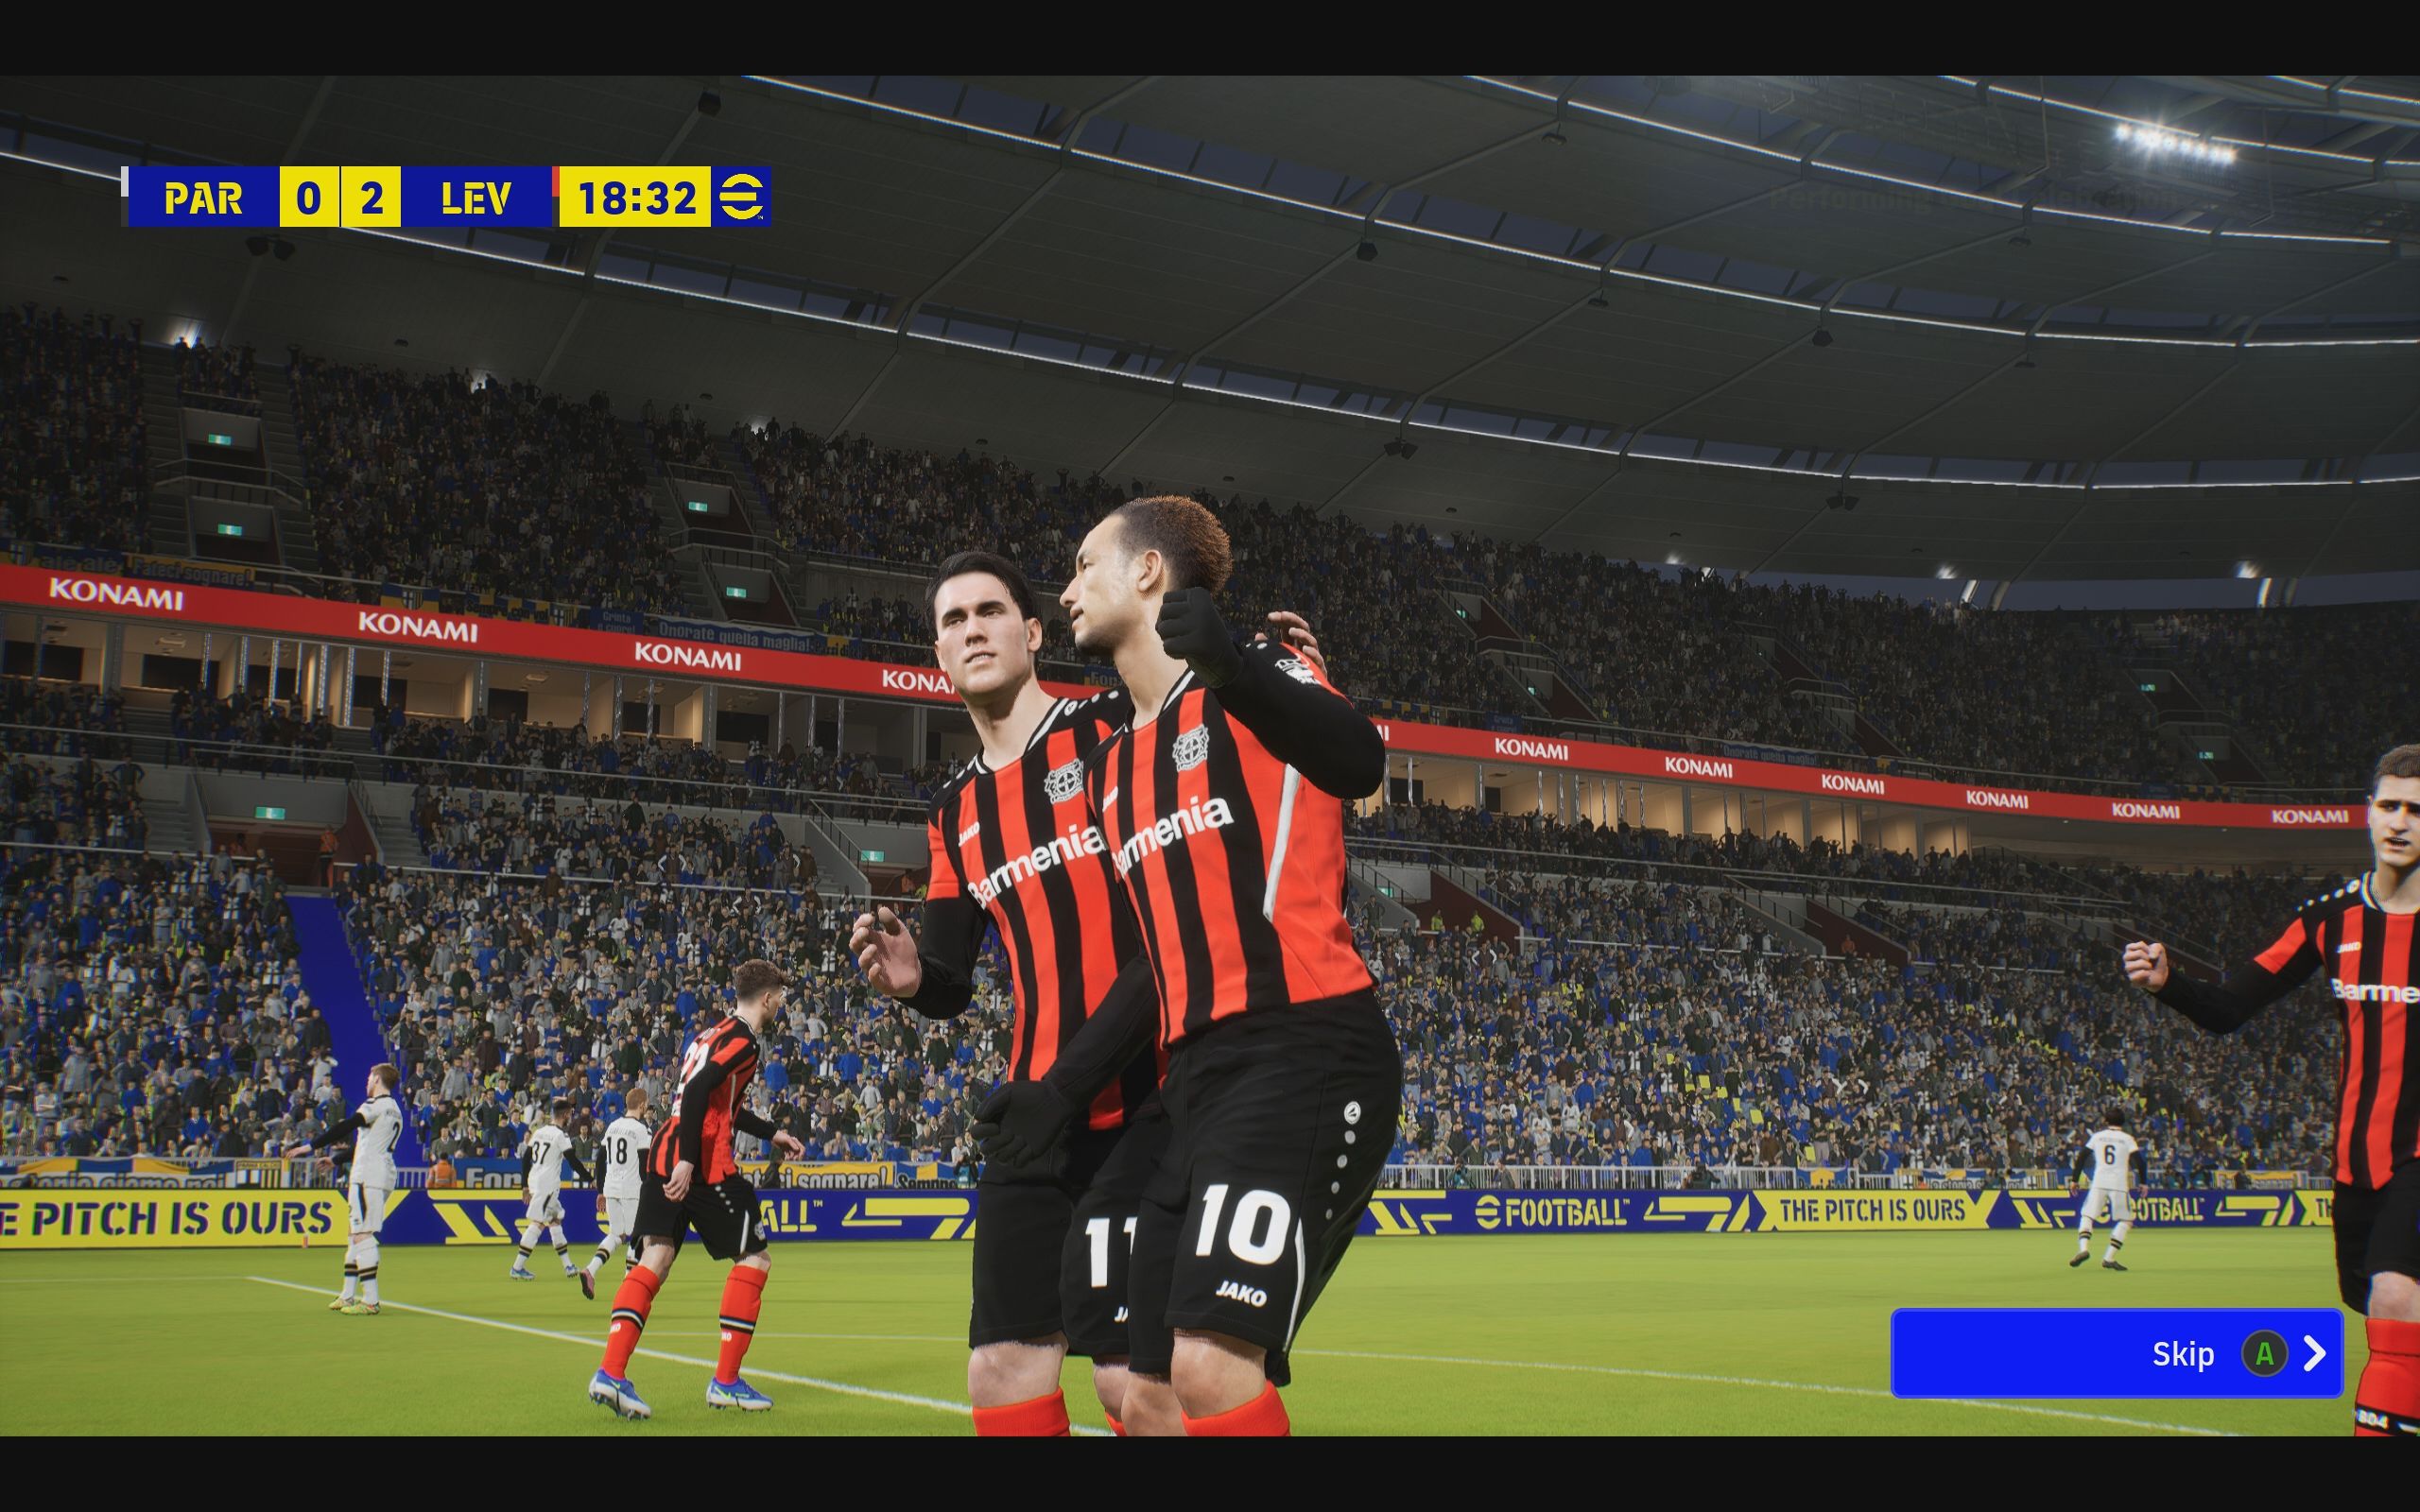 eFootball review: Two players in red and black vertical striped kit celebrate a goal.